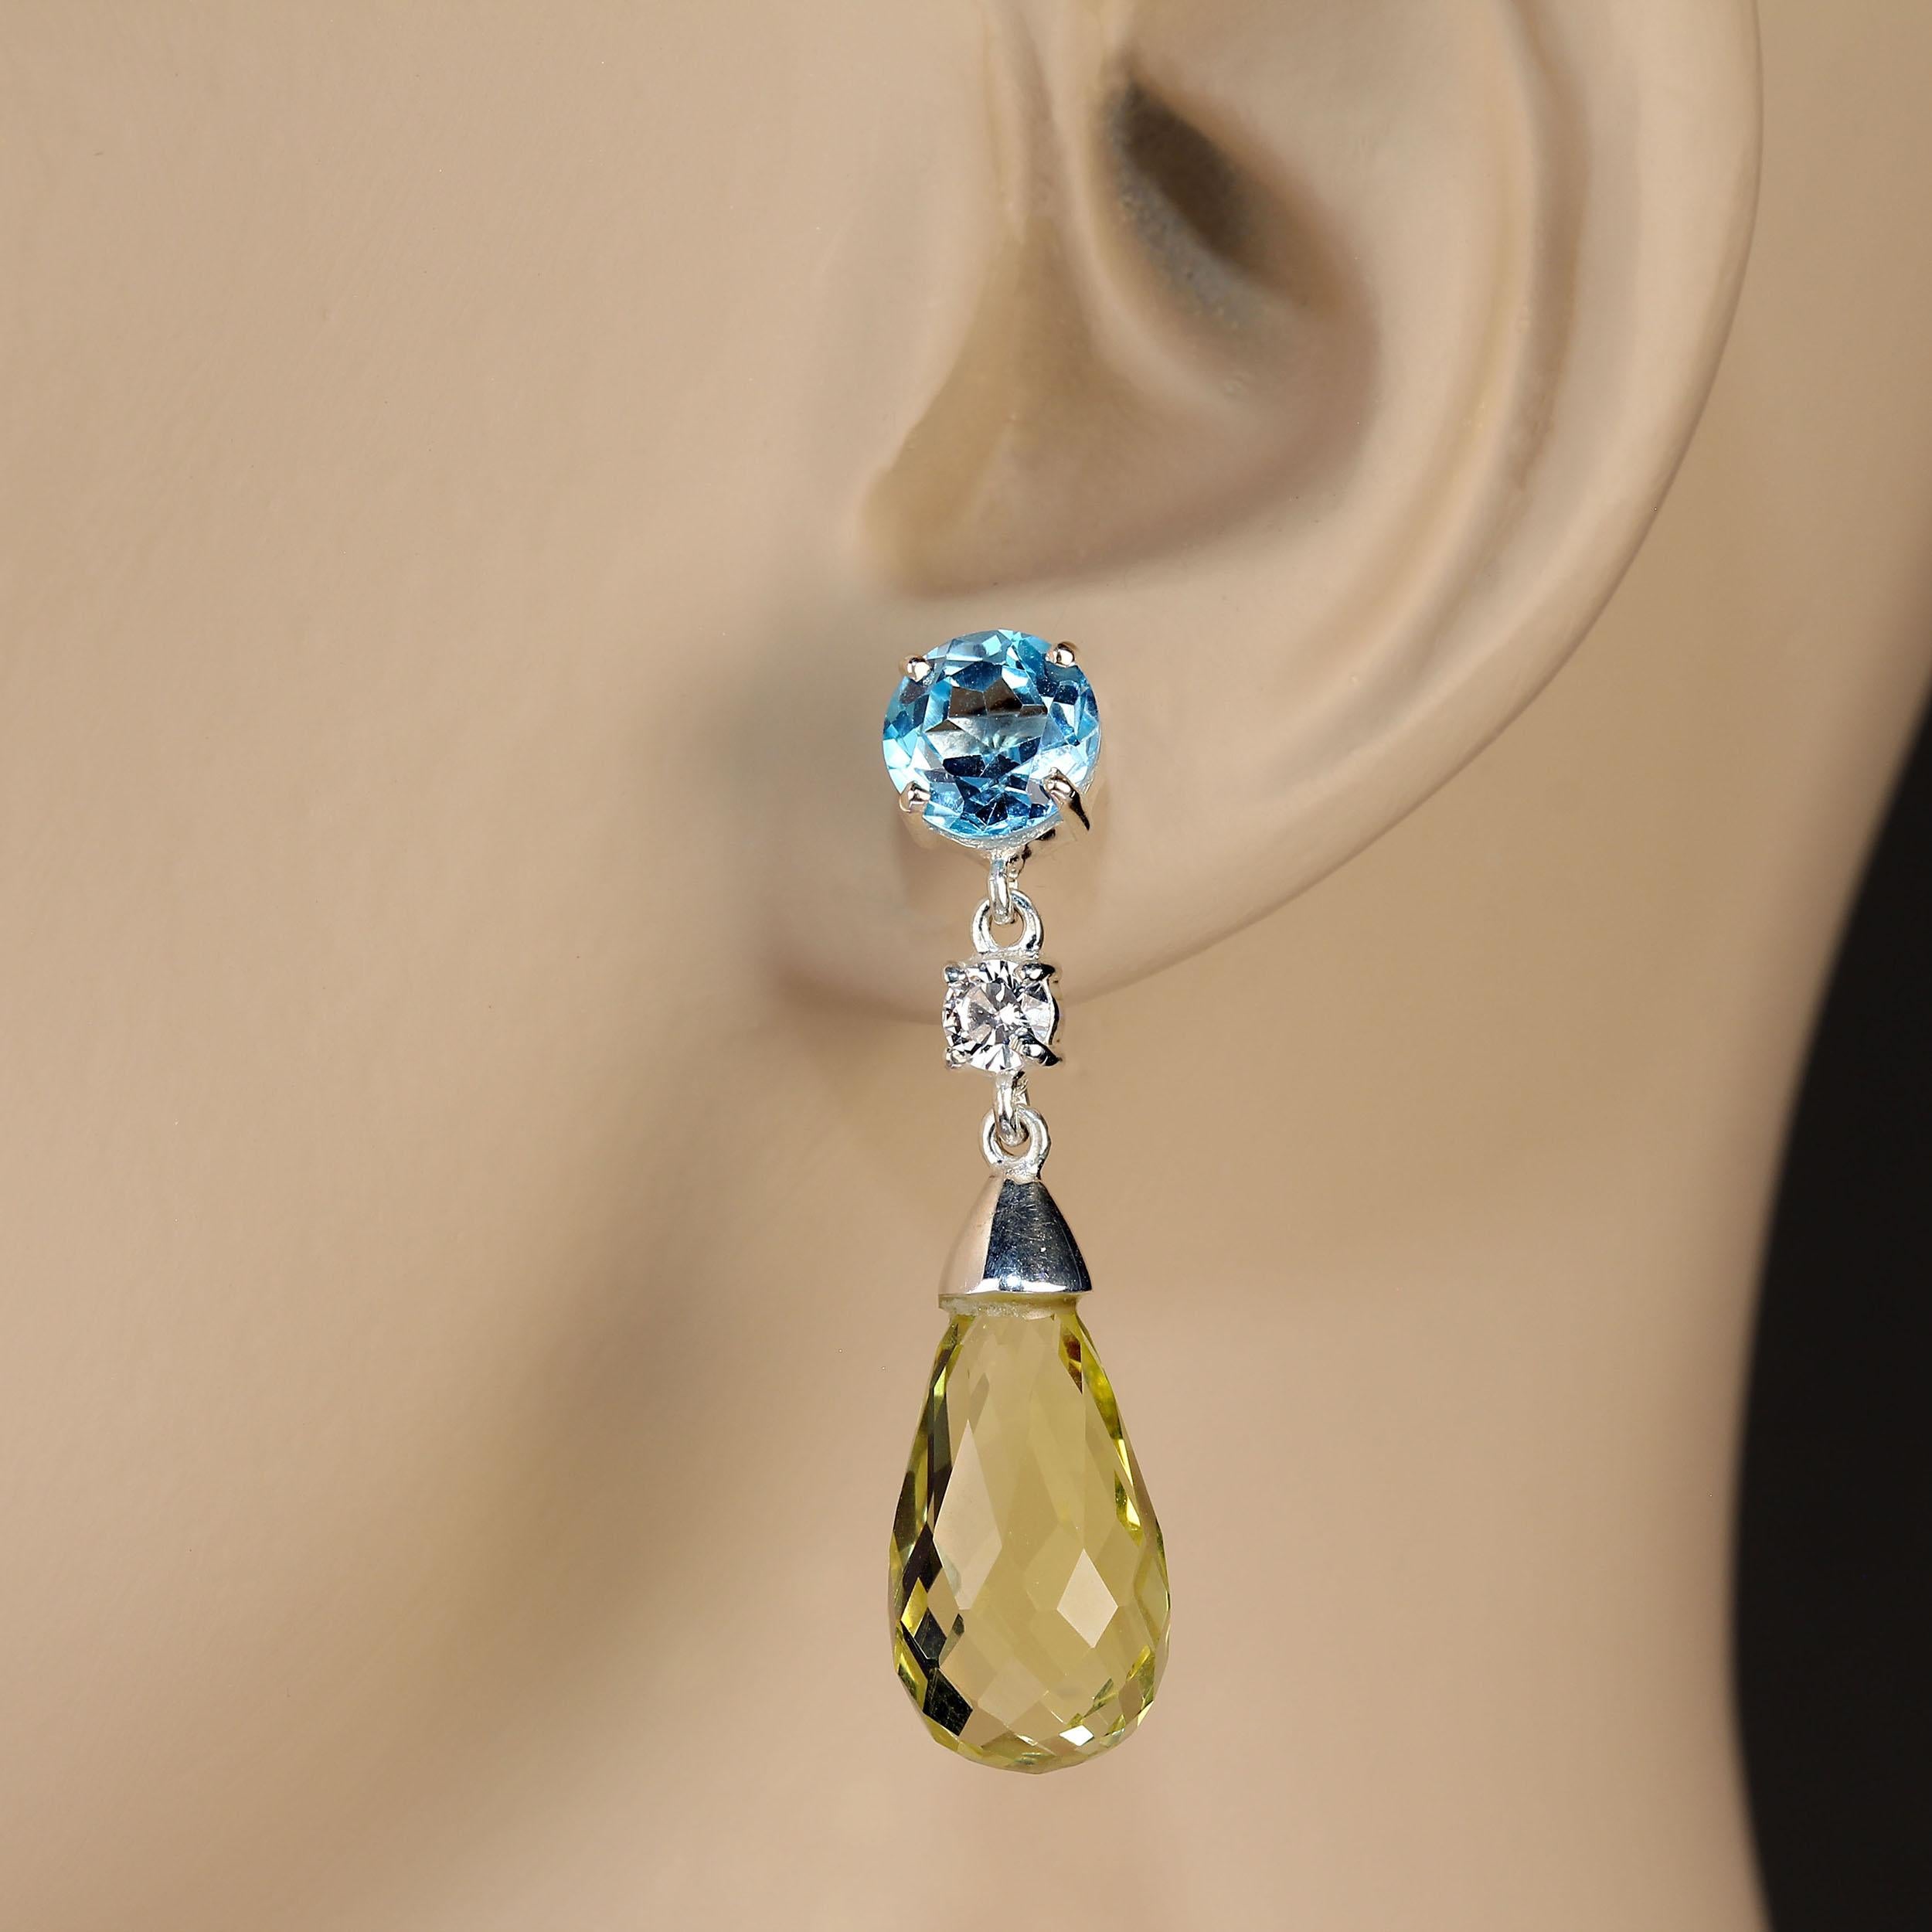 Elegant dangle Lemon Quartz and Blue Topaz in Sterling Silver Earrings. These lovely long drop Lemon Quartz briolettes weigh 17.28ctw.  The 7mm round sparkling Blue Topaz weigh 3.44 ctw.  The total drop is 1 3/8 inches. The two gemstones are